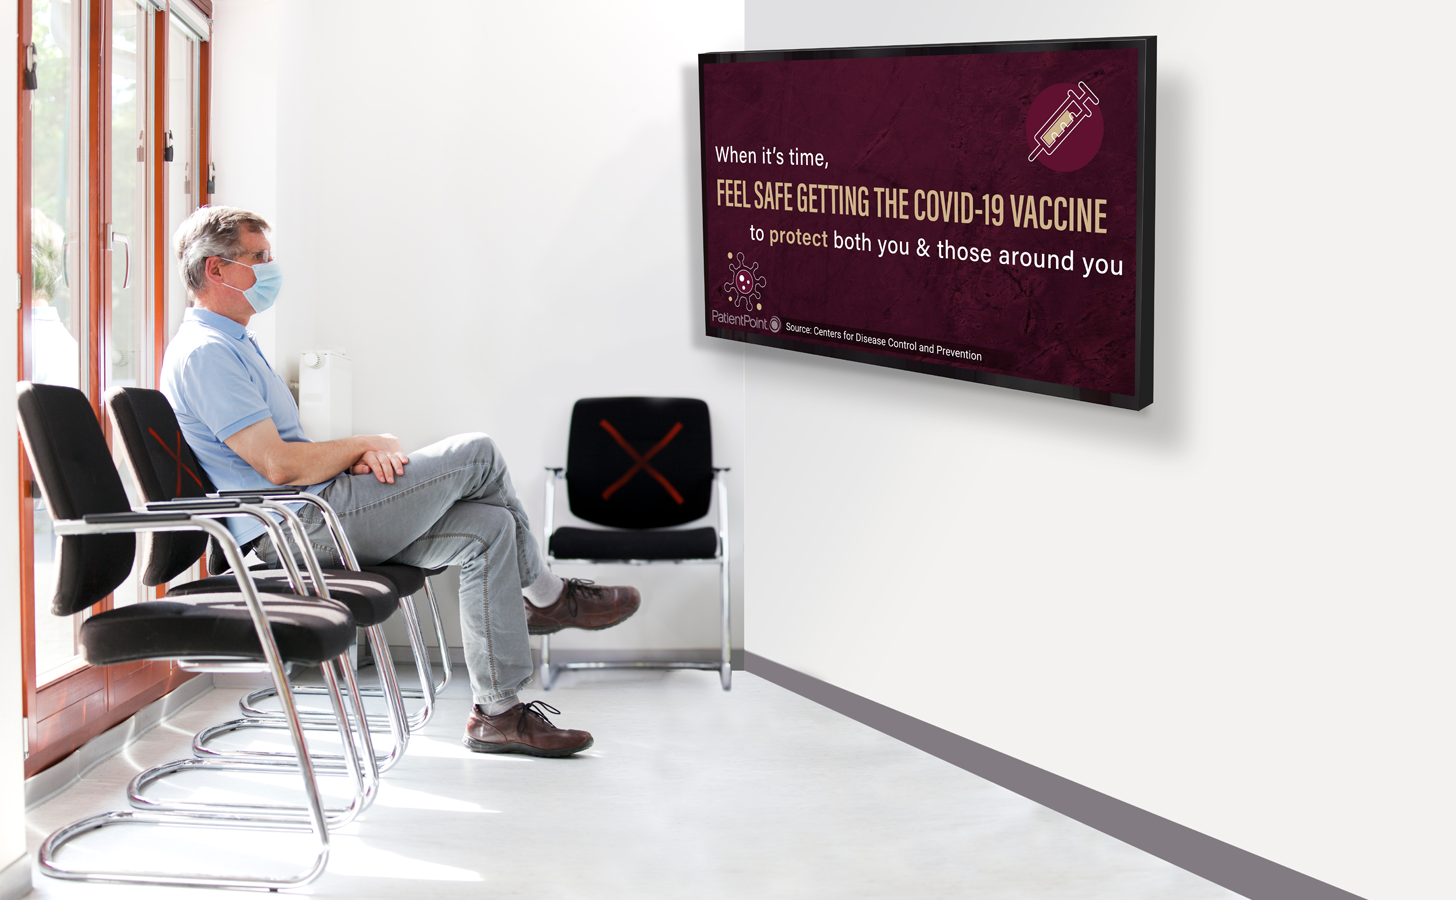 A middle-aged man wearing a mask sits in the waiting room of his physician's office and watches content on a TV screen about the safety of the COVID-19 vaccine.